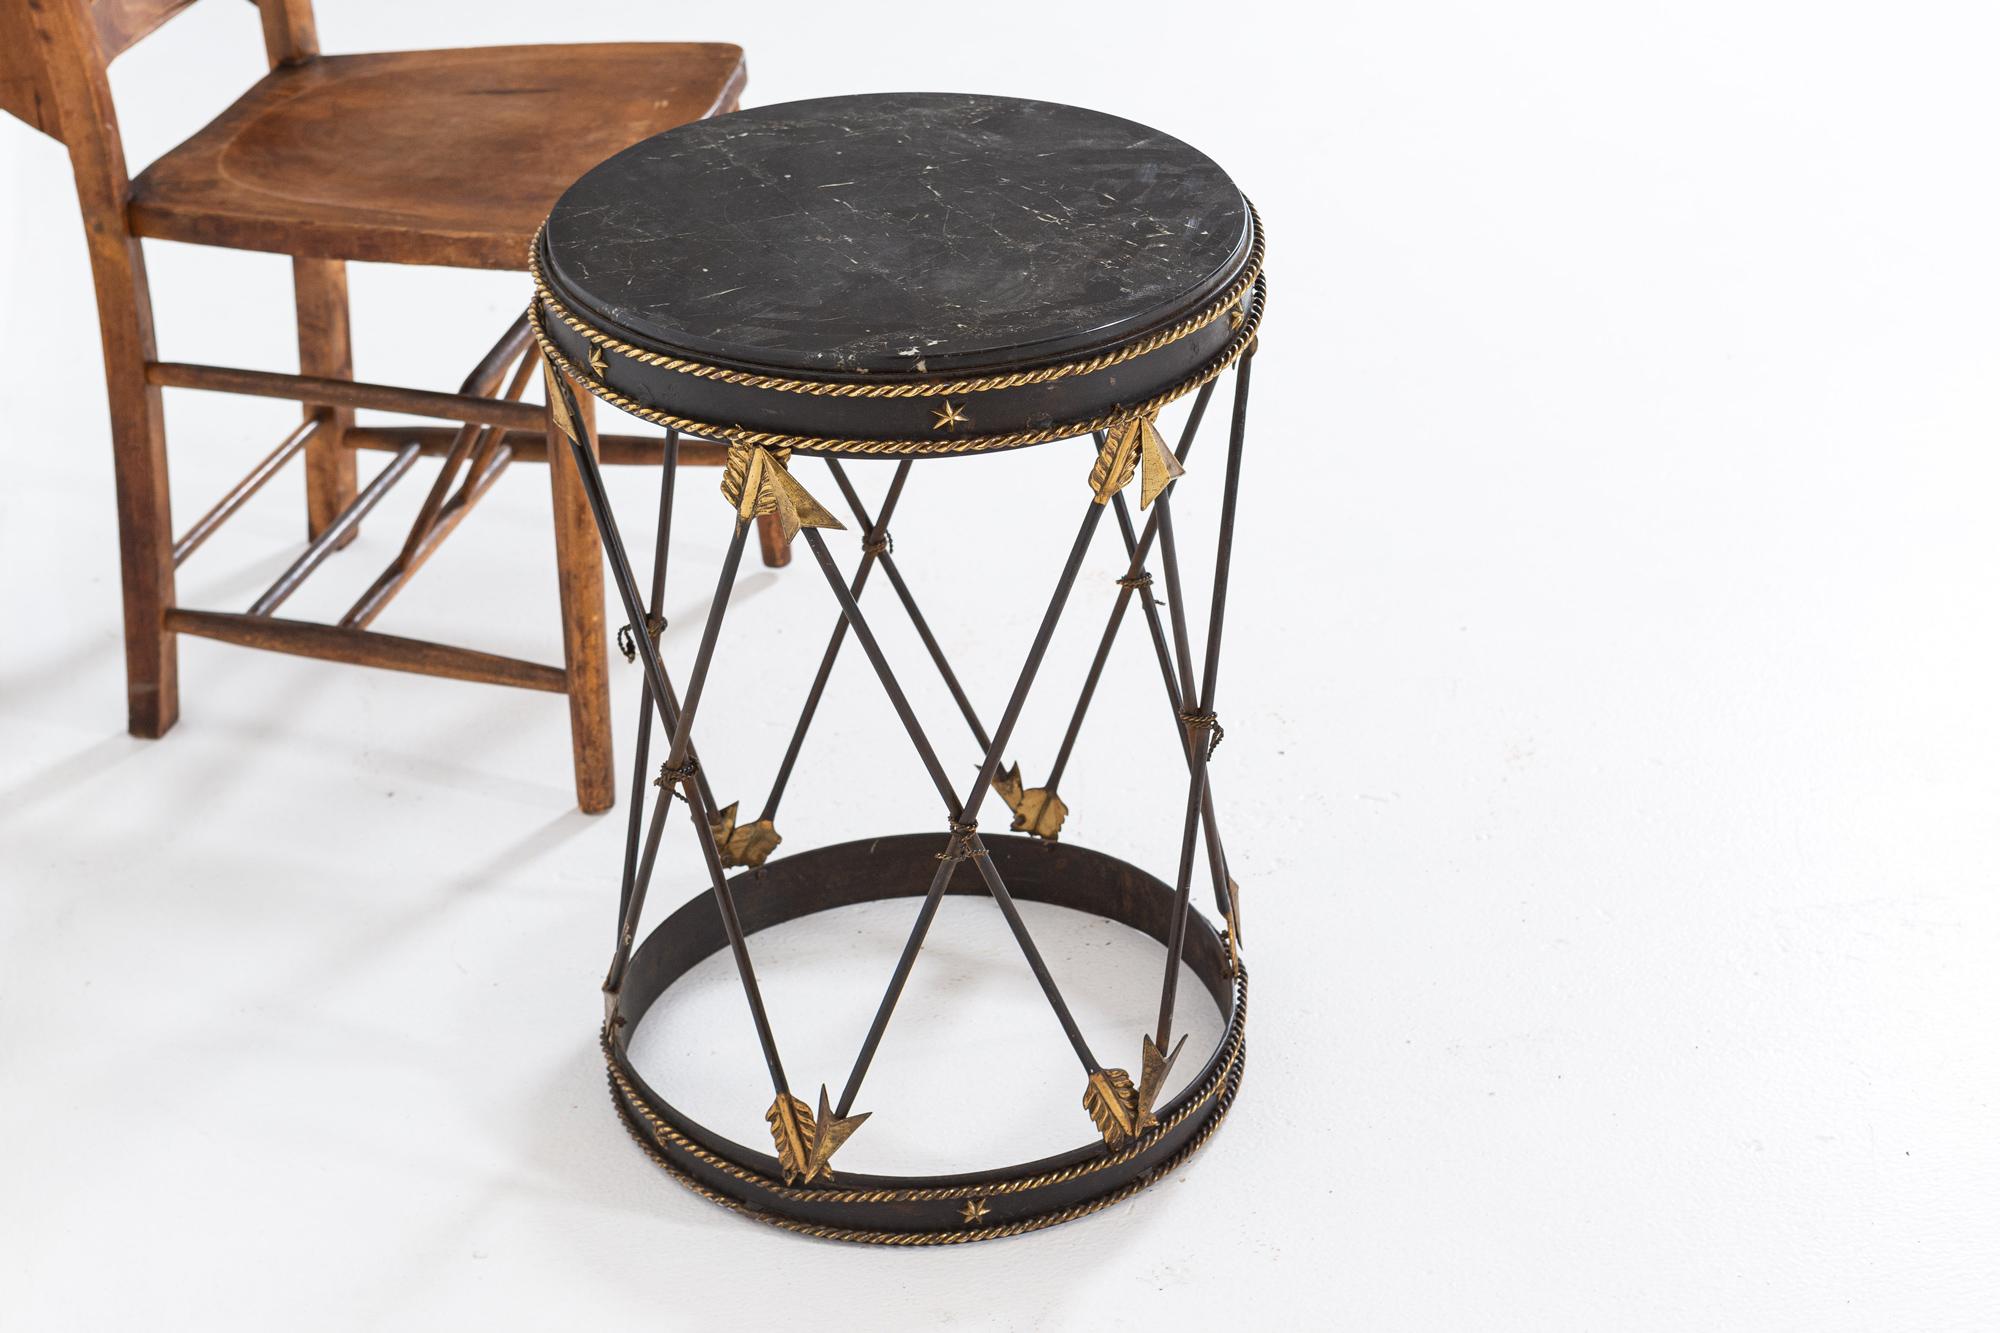 Circa 1920

French Marble Empire Revival Arrow Side Table.
With decorative twisted rope and star detailing

Iron, Brass and marble.

Sku 768

Diameter 41 x H51 cm